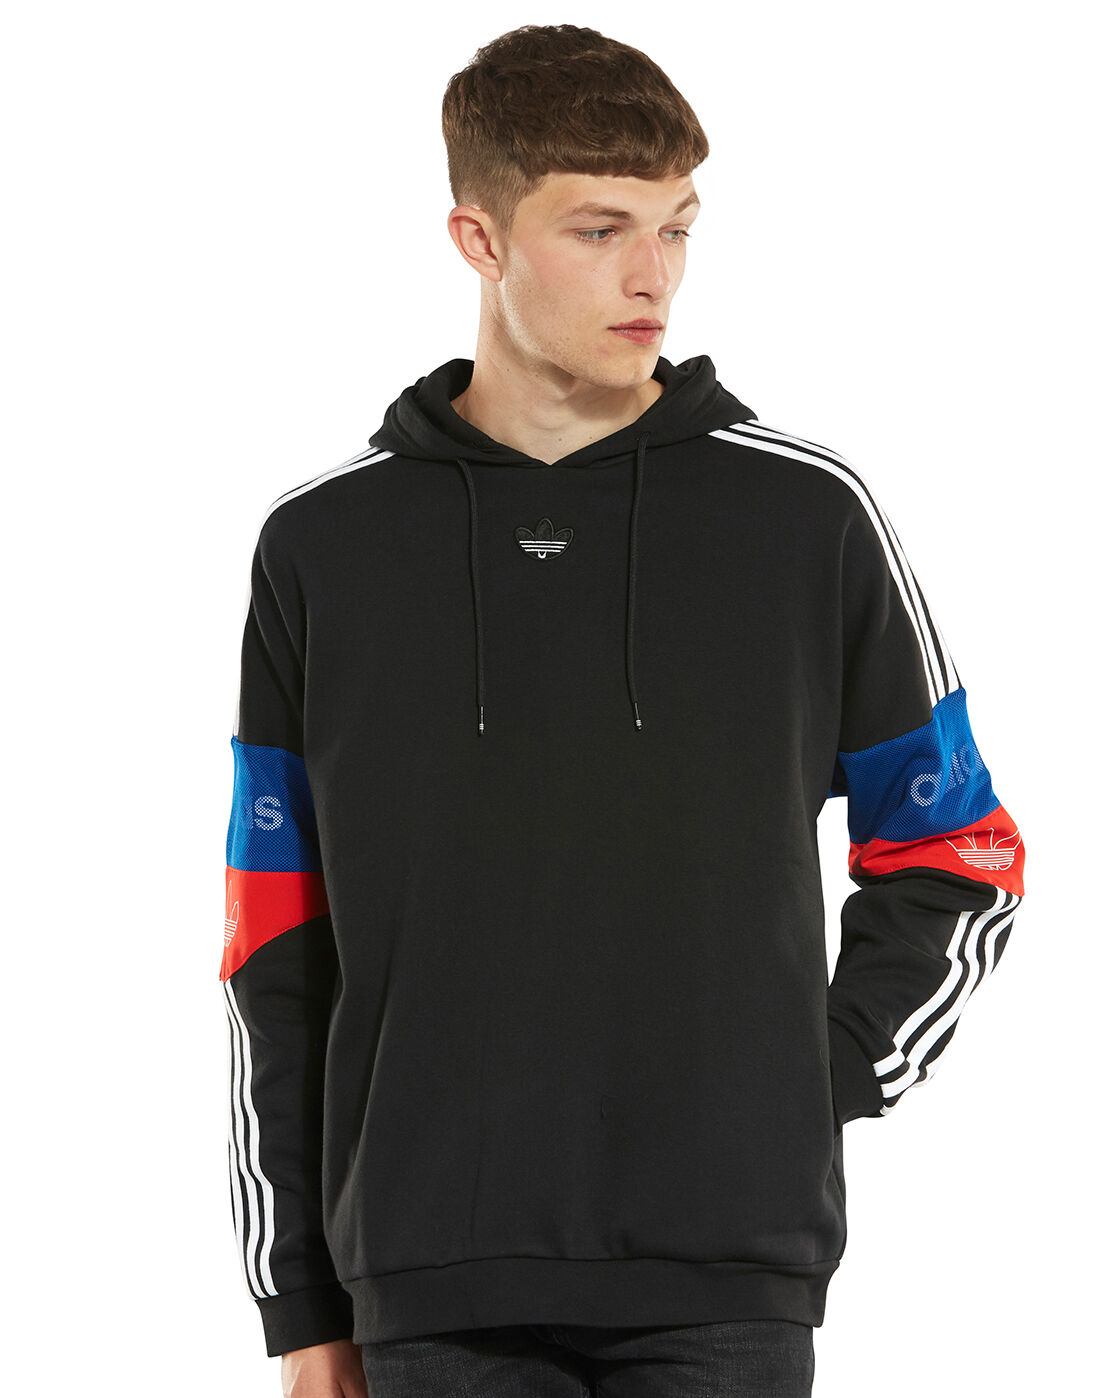 grey and red adidas hoodie